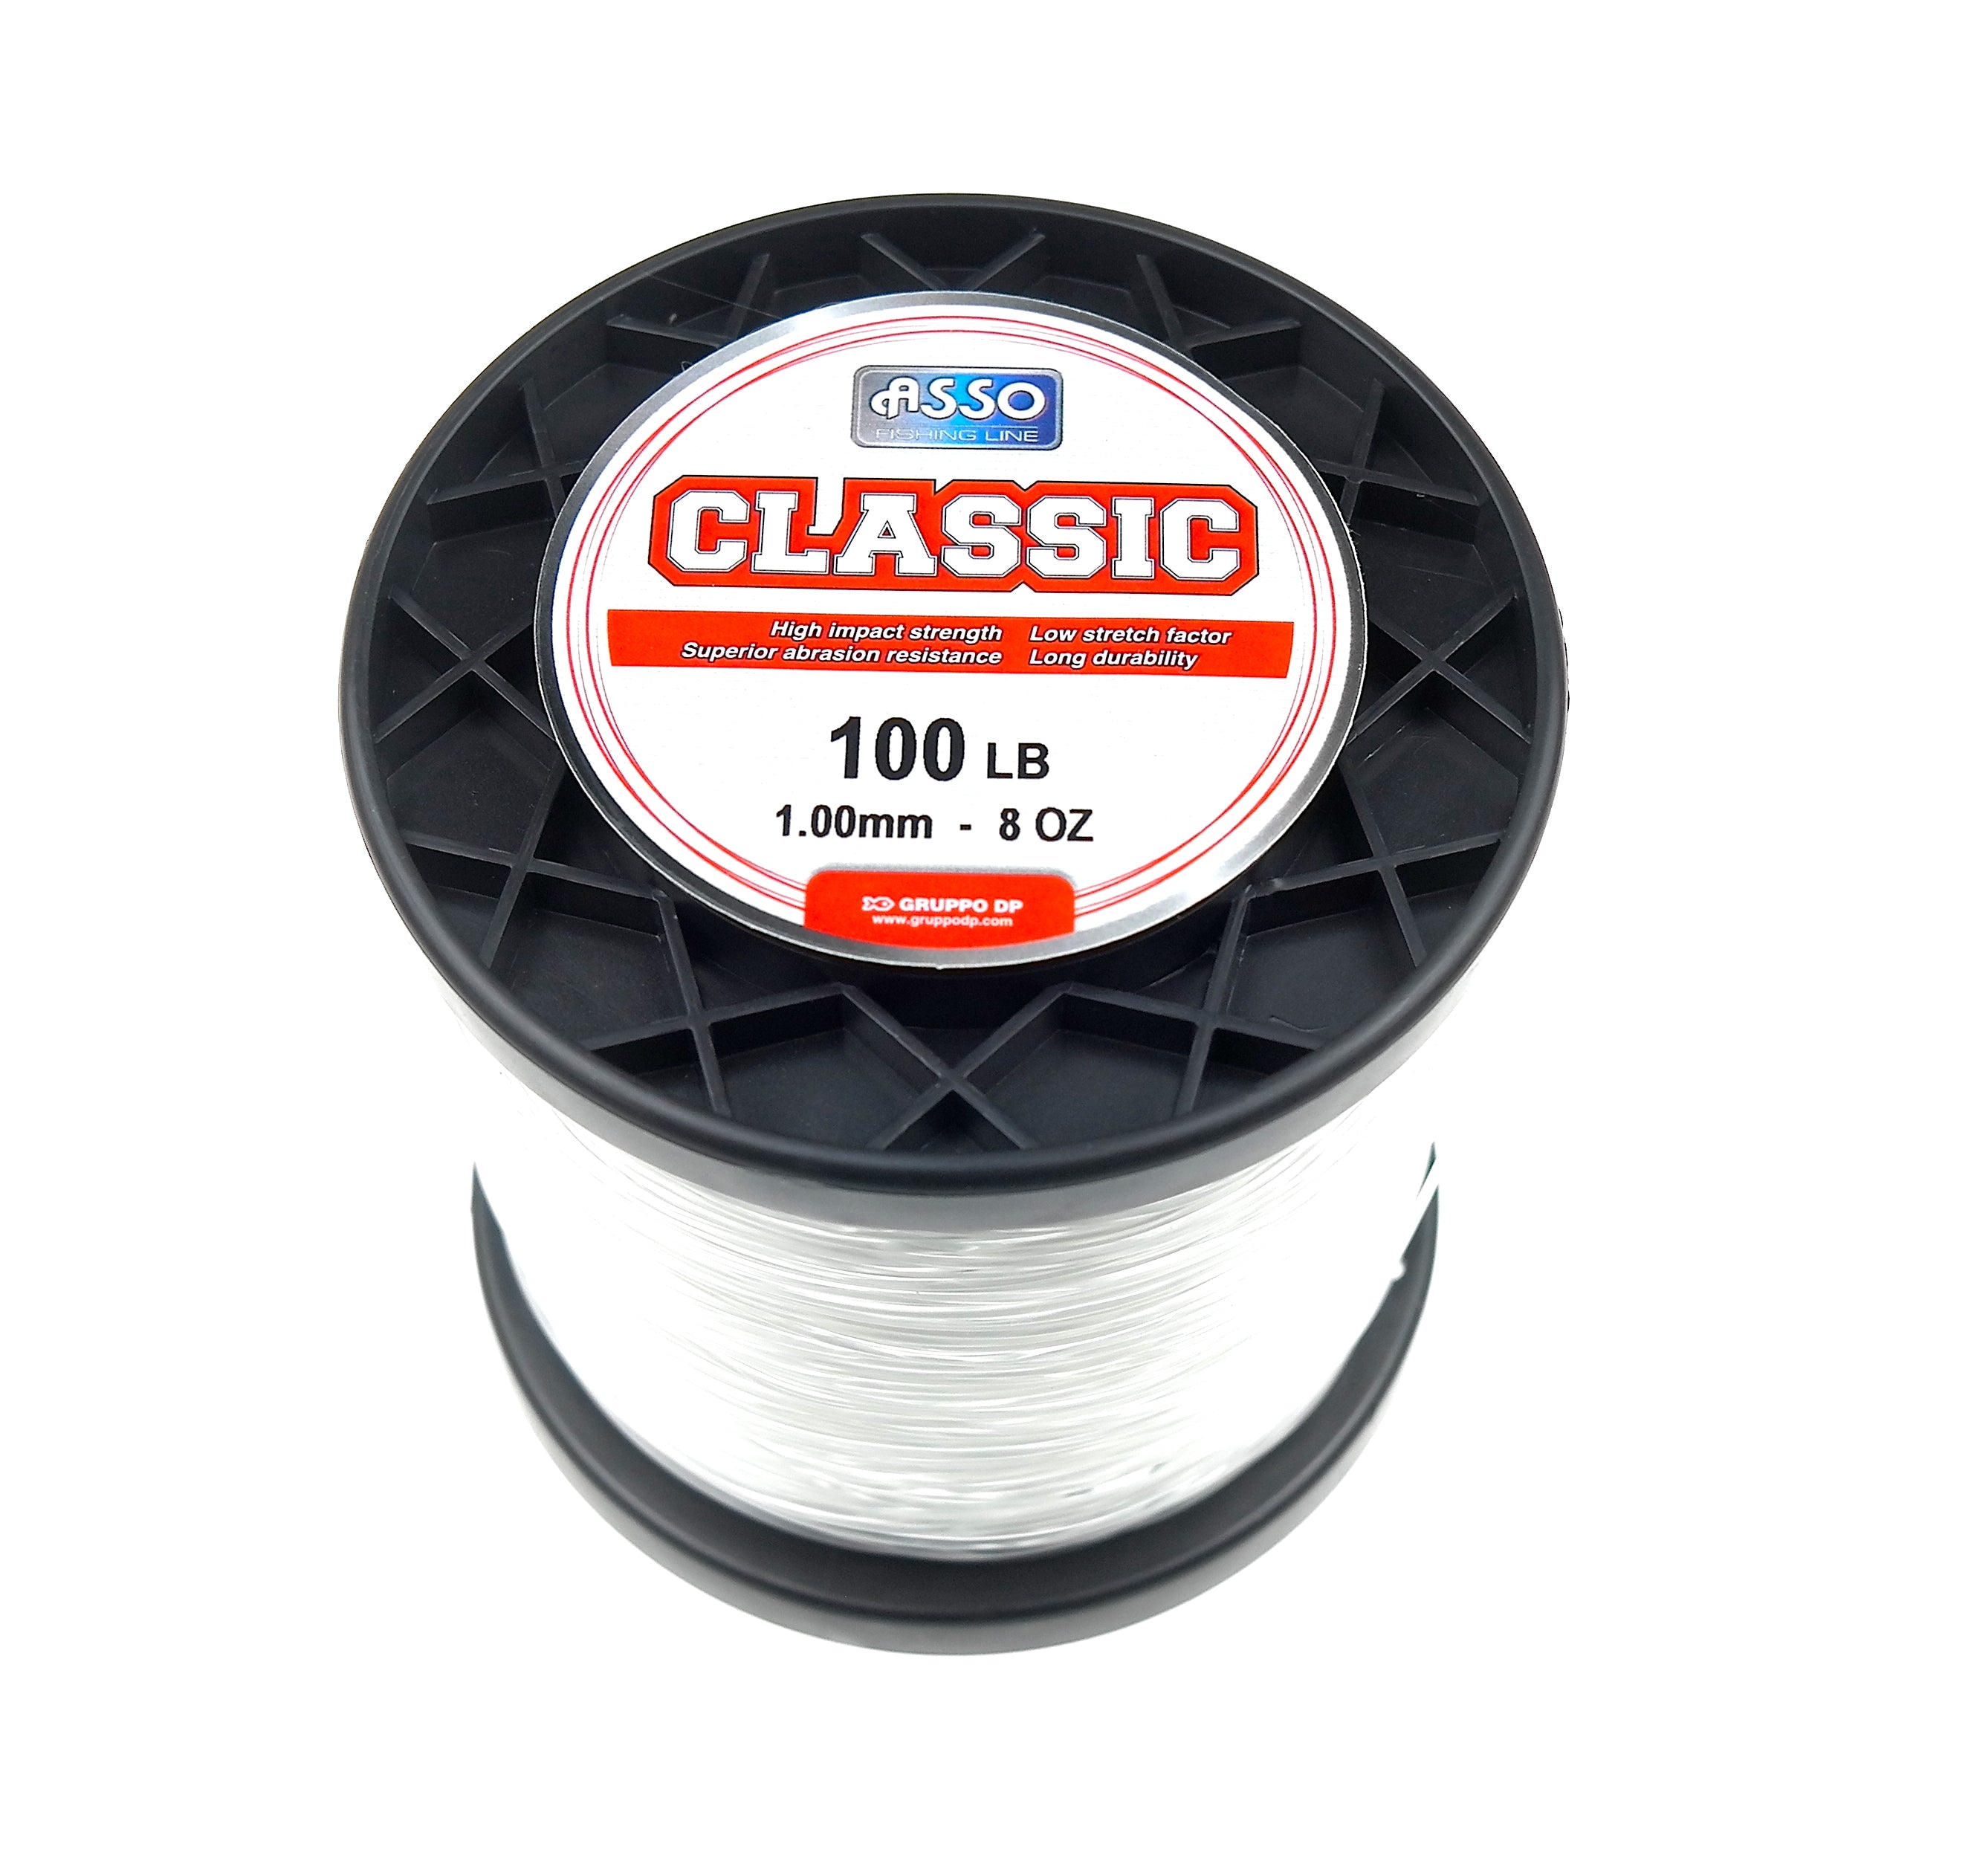 Asso Classic 8oz Shock leader for Fishing – Asso Fishing Line UK